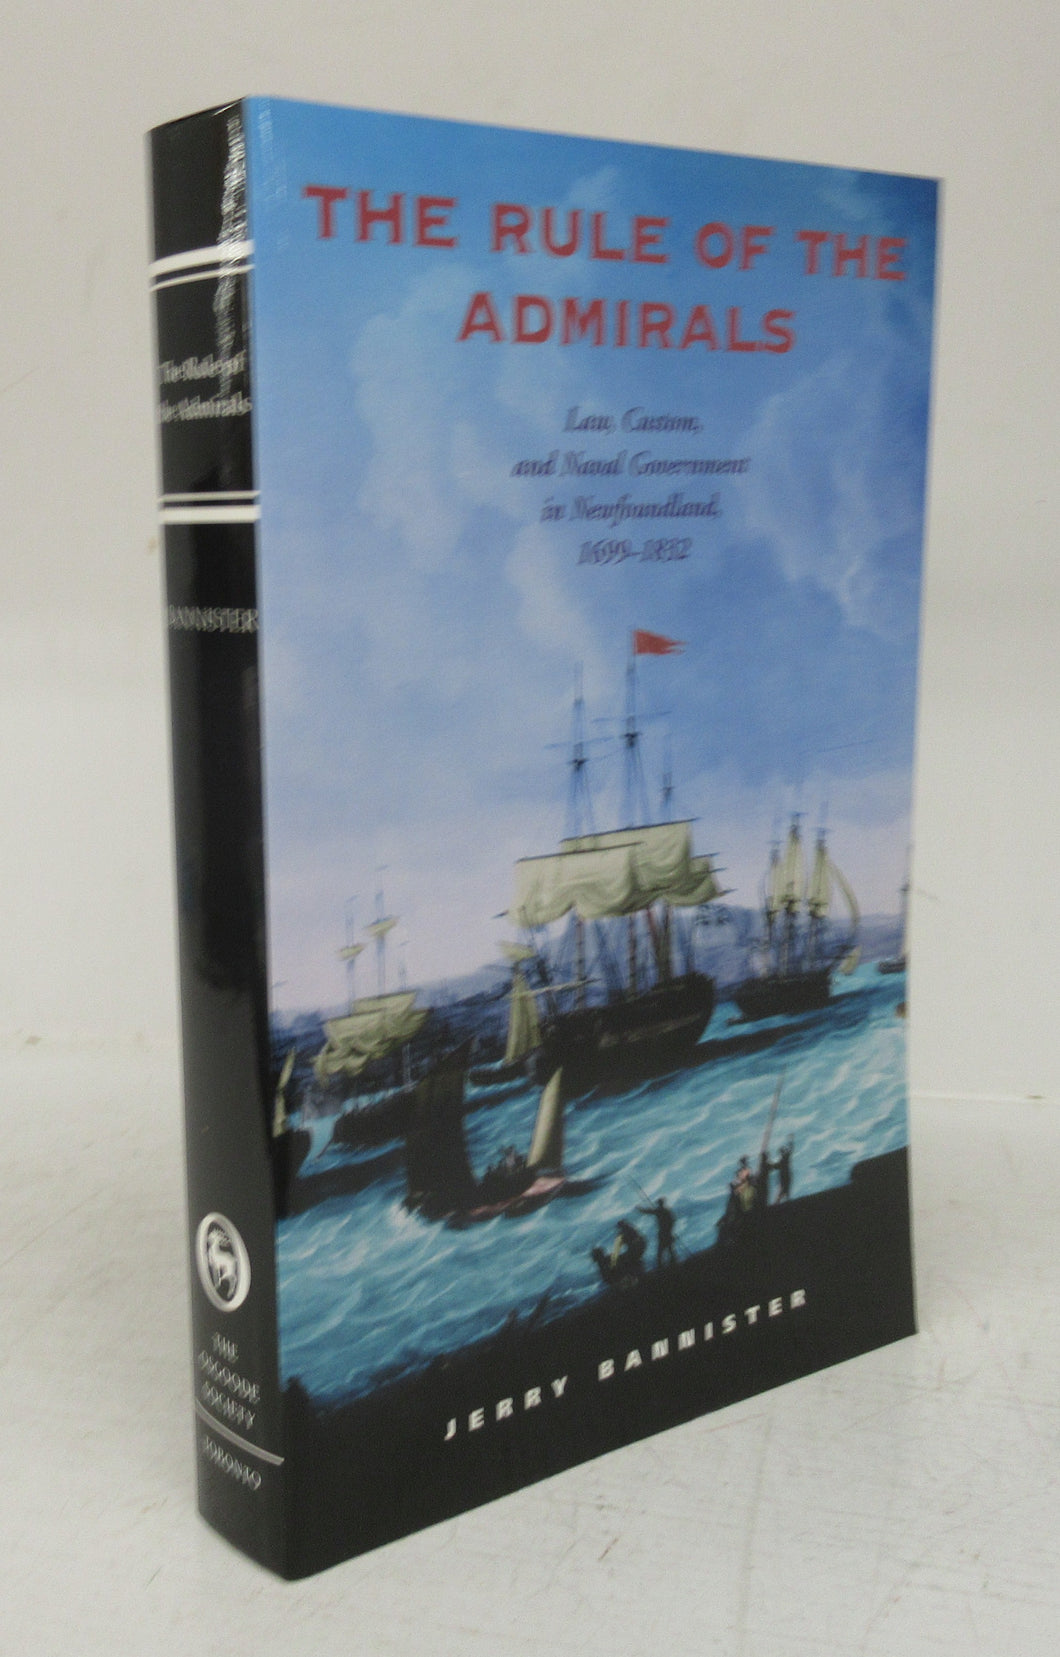 The Rule of the Admirals: Law, Custom, and Naval Government in Newfoundland, 1699-1832